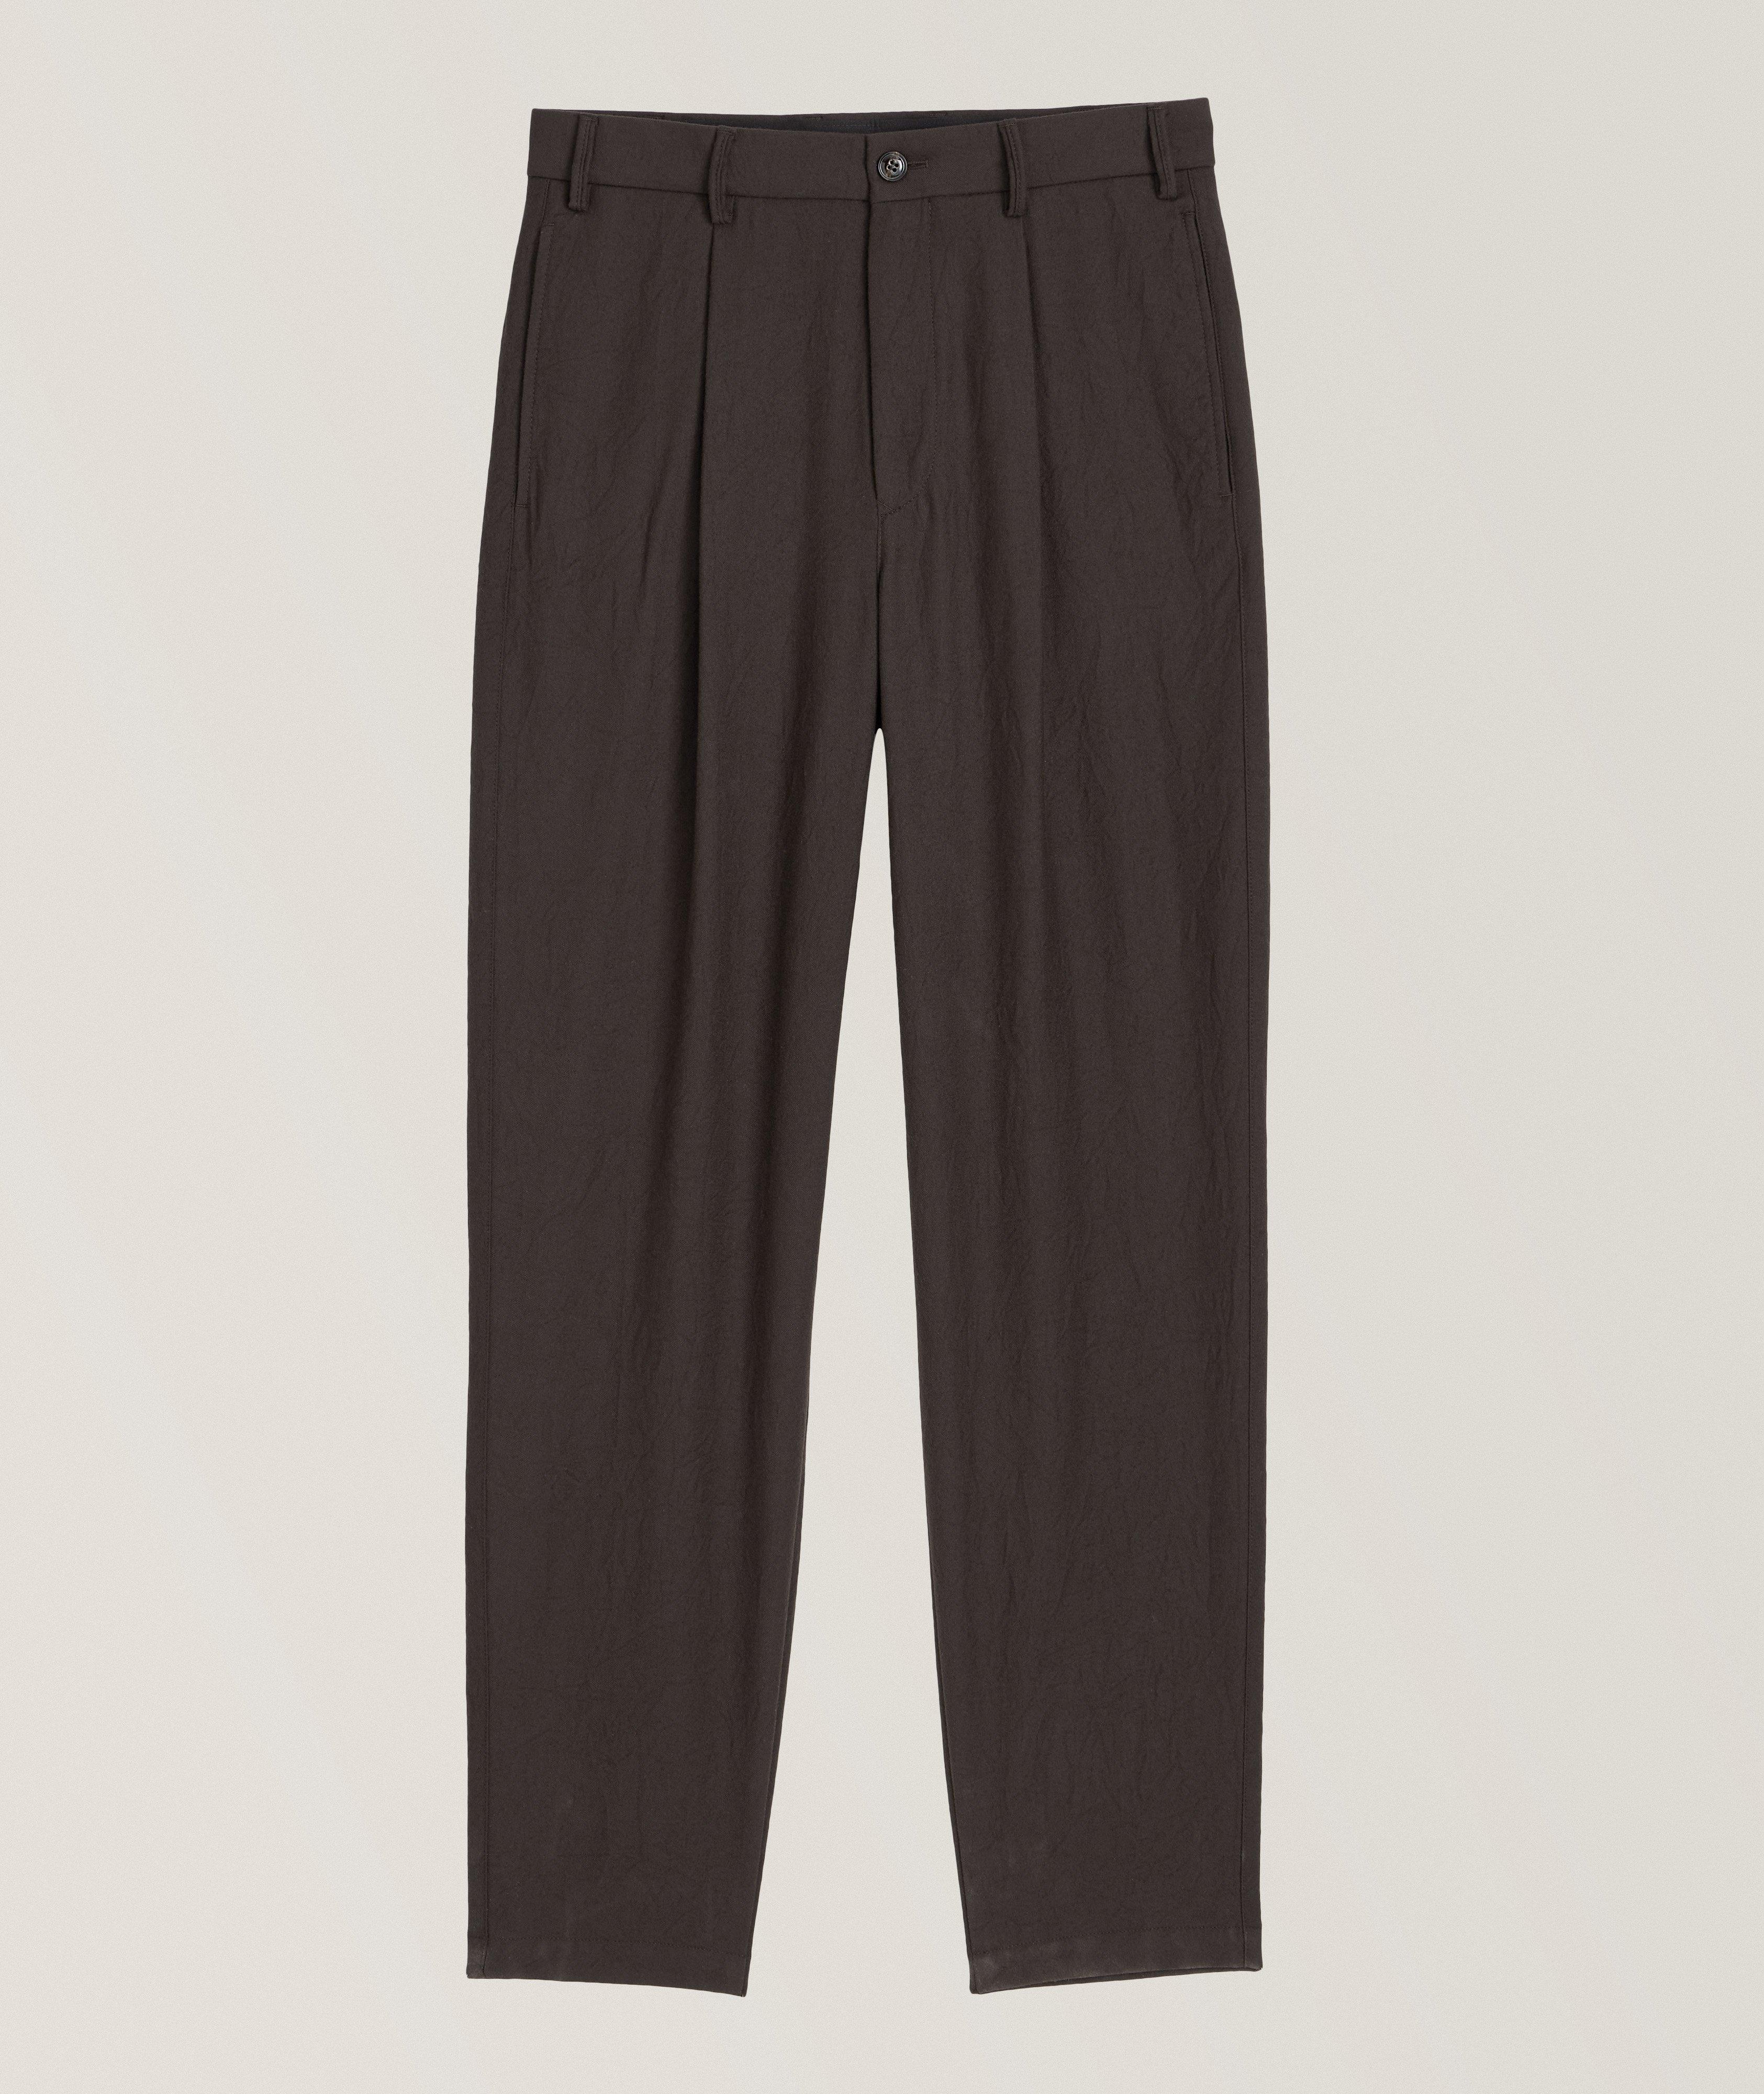 Wool Trousers image 0